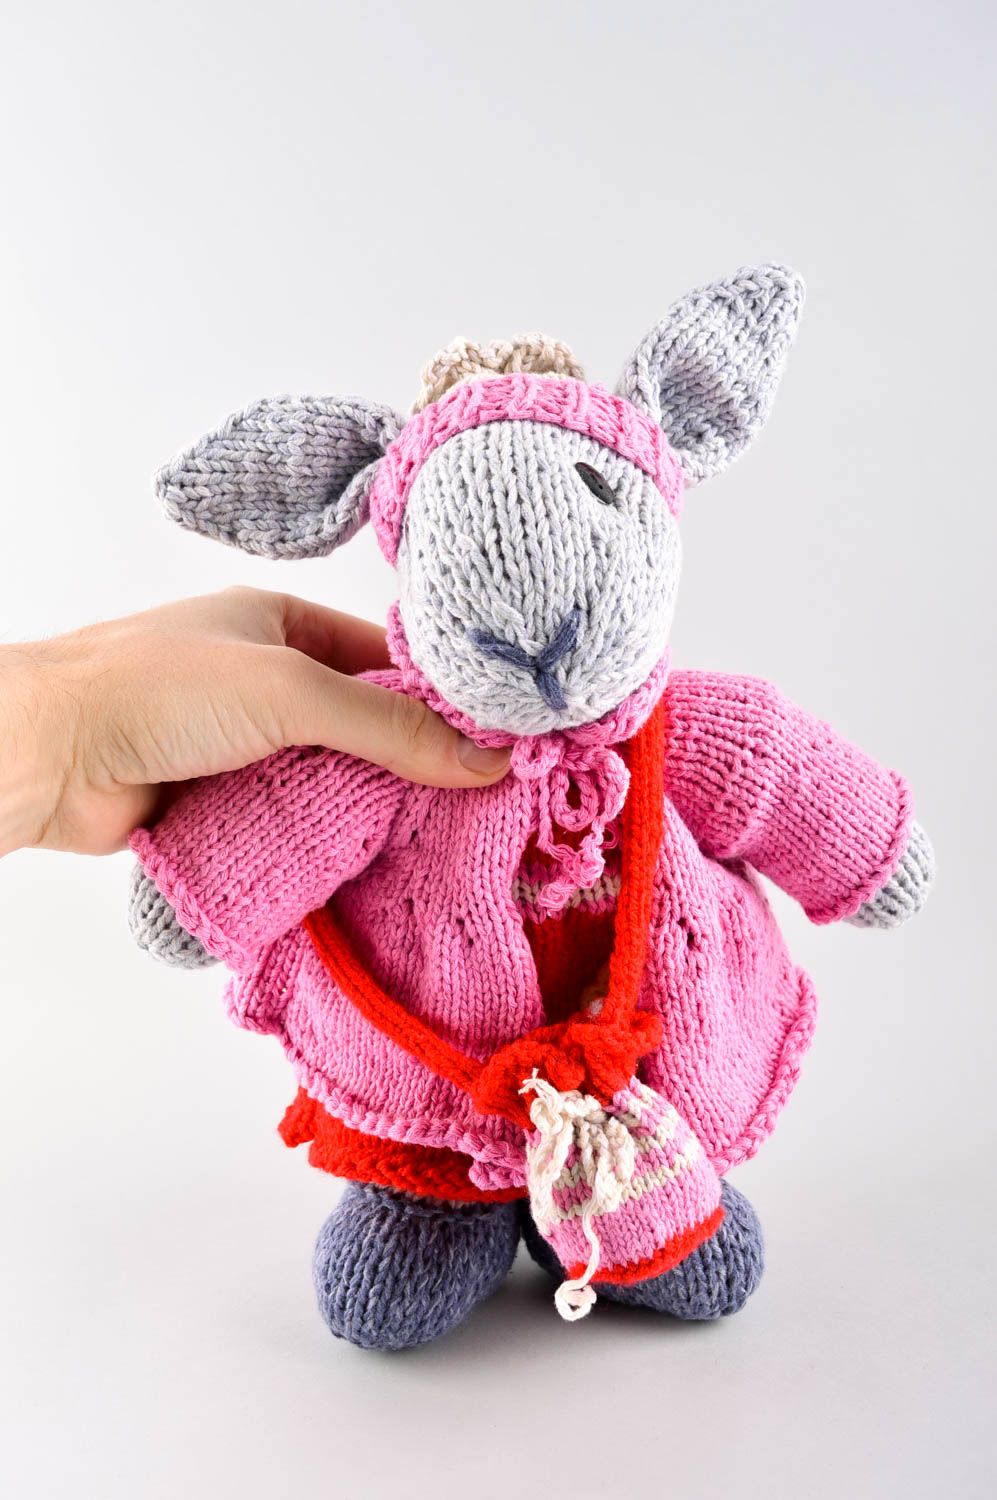 Handmade unusual soft toy textile toys for kids pink knitted rabbit toy photo 5